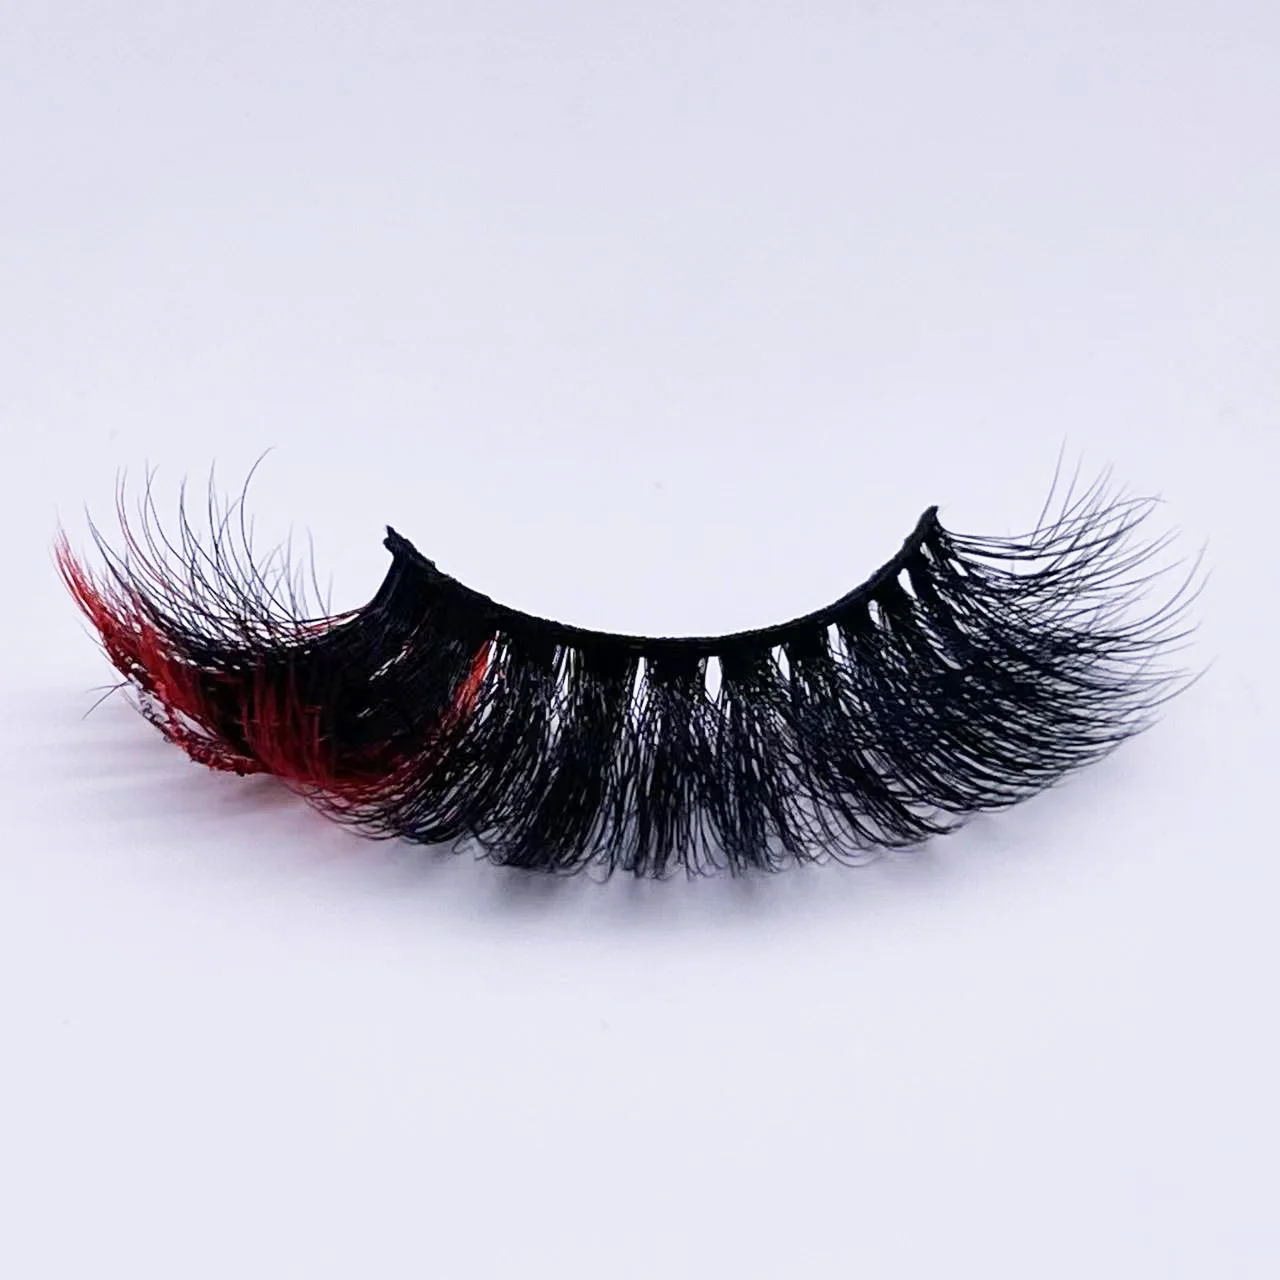 Hbzgtlad Colored Lashes Glitter Mink 15mm -20mm Fluffy Color Streaks Cosplay Makeup Beauty Eyelashes -Outlet Maid Outfit Store Sce90254ec8f94bb5a3780e28fc0ffd254.jpg